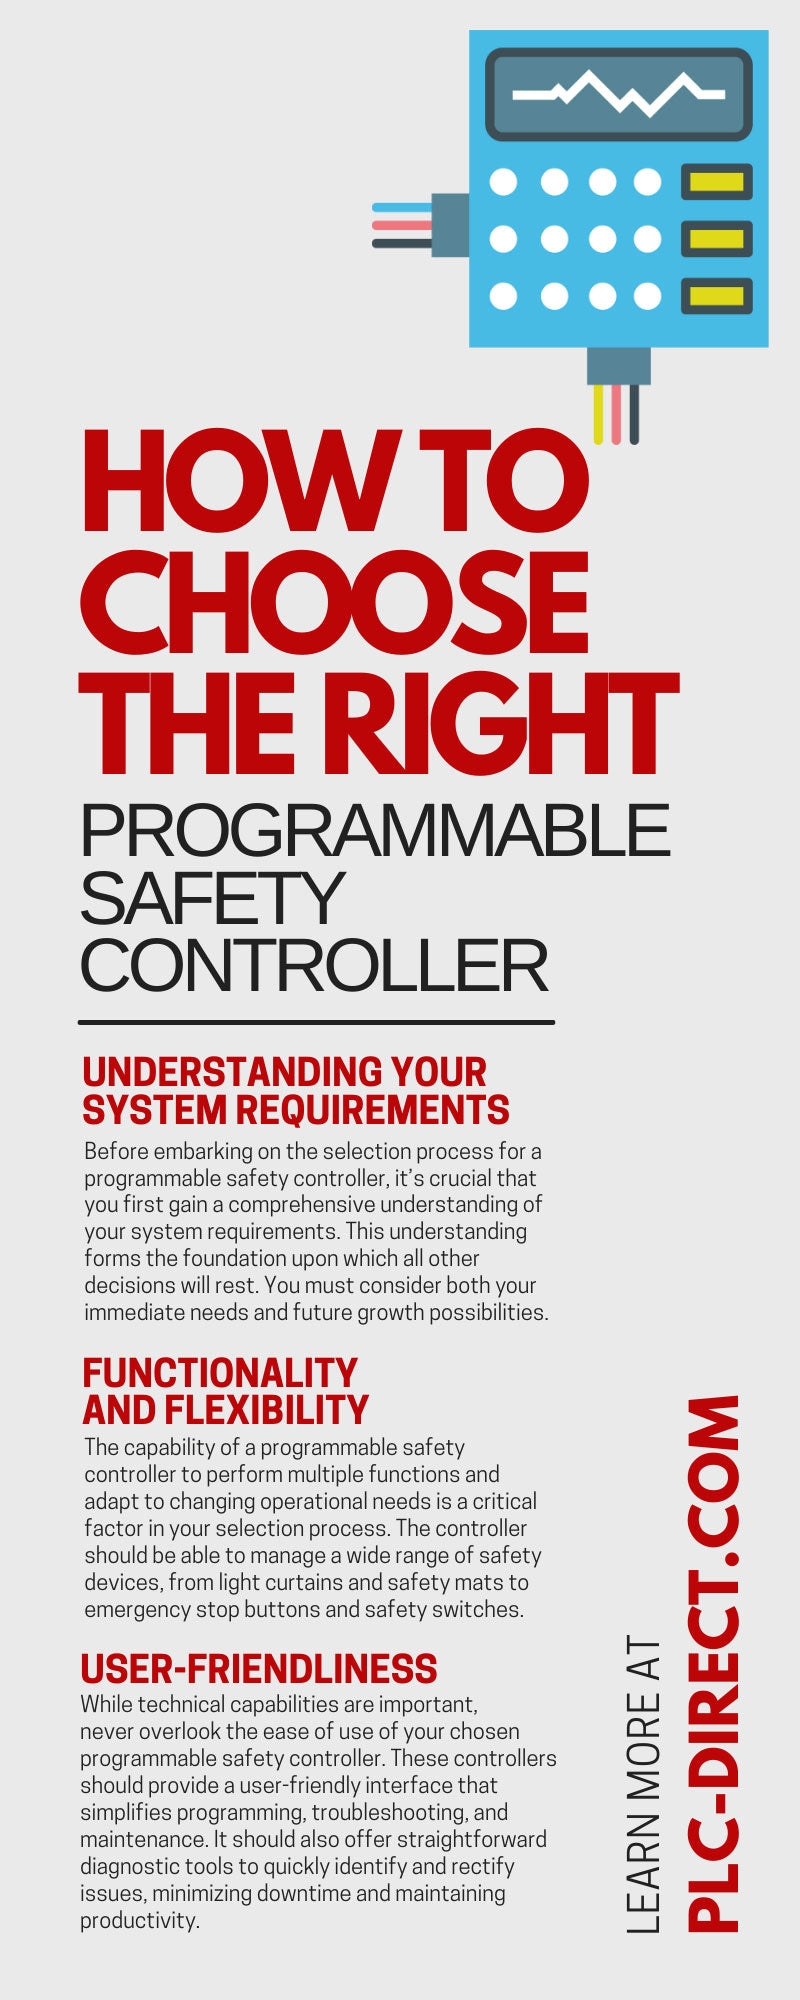 How To Choose the Right Programmable Safety Controller